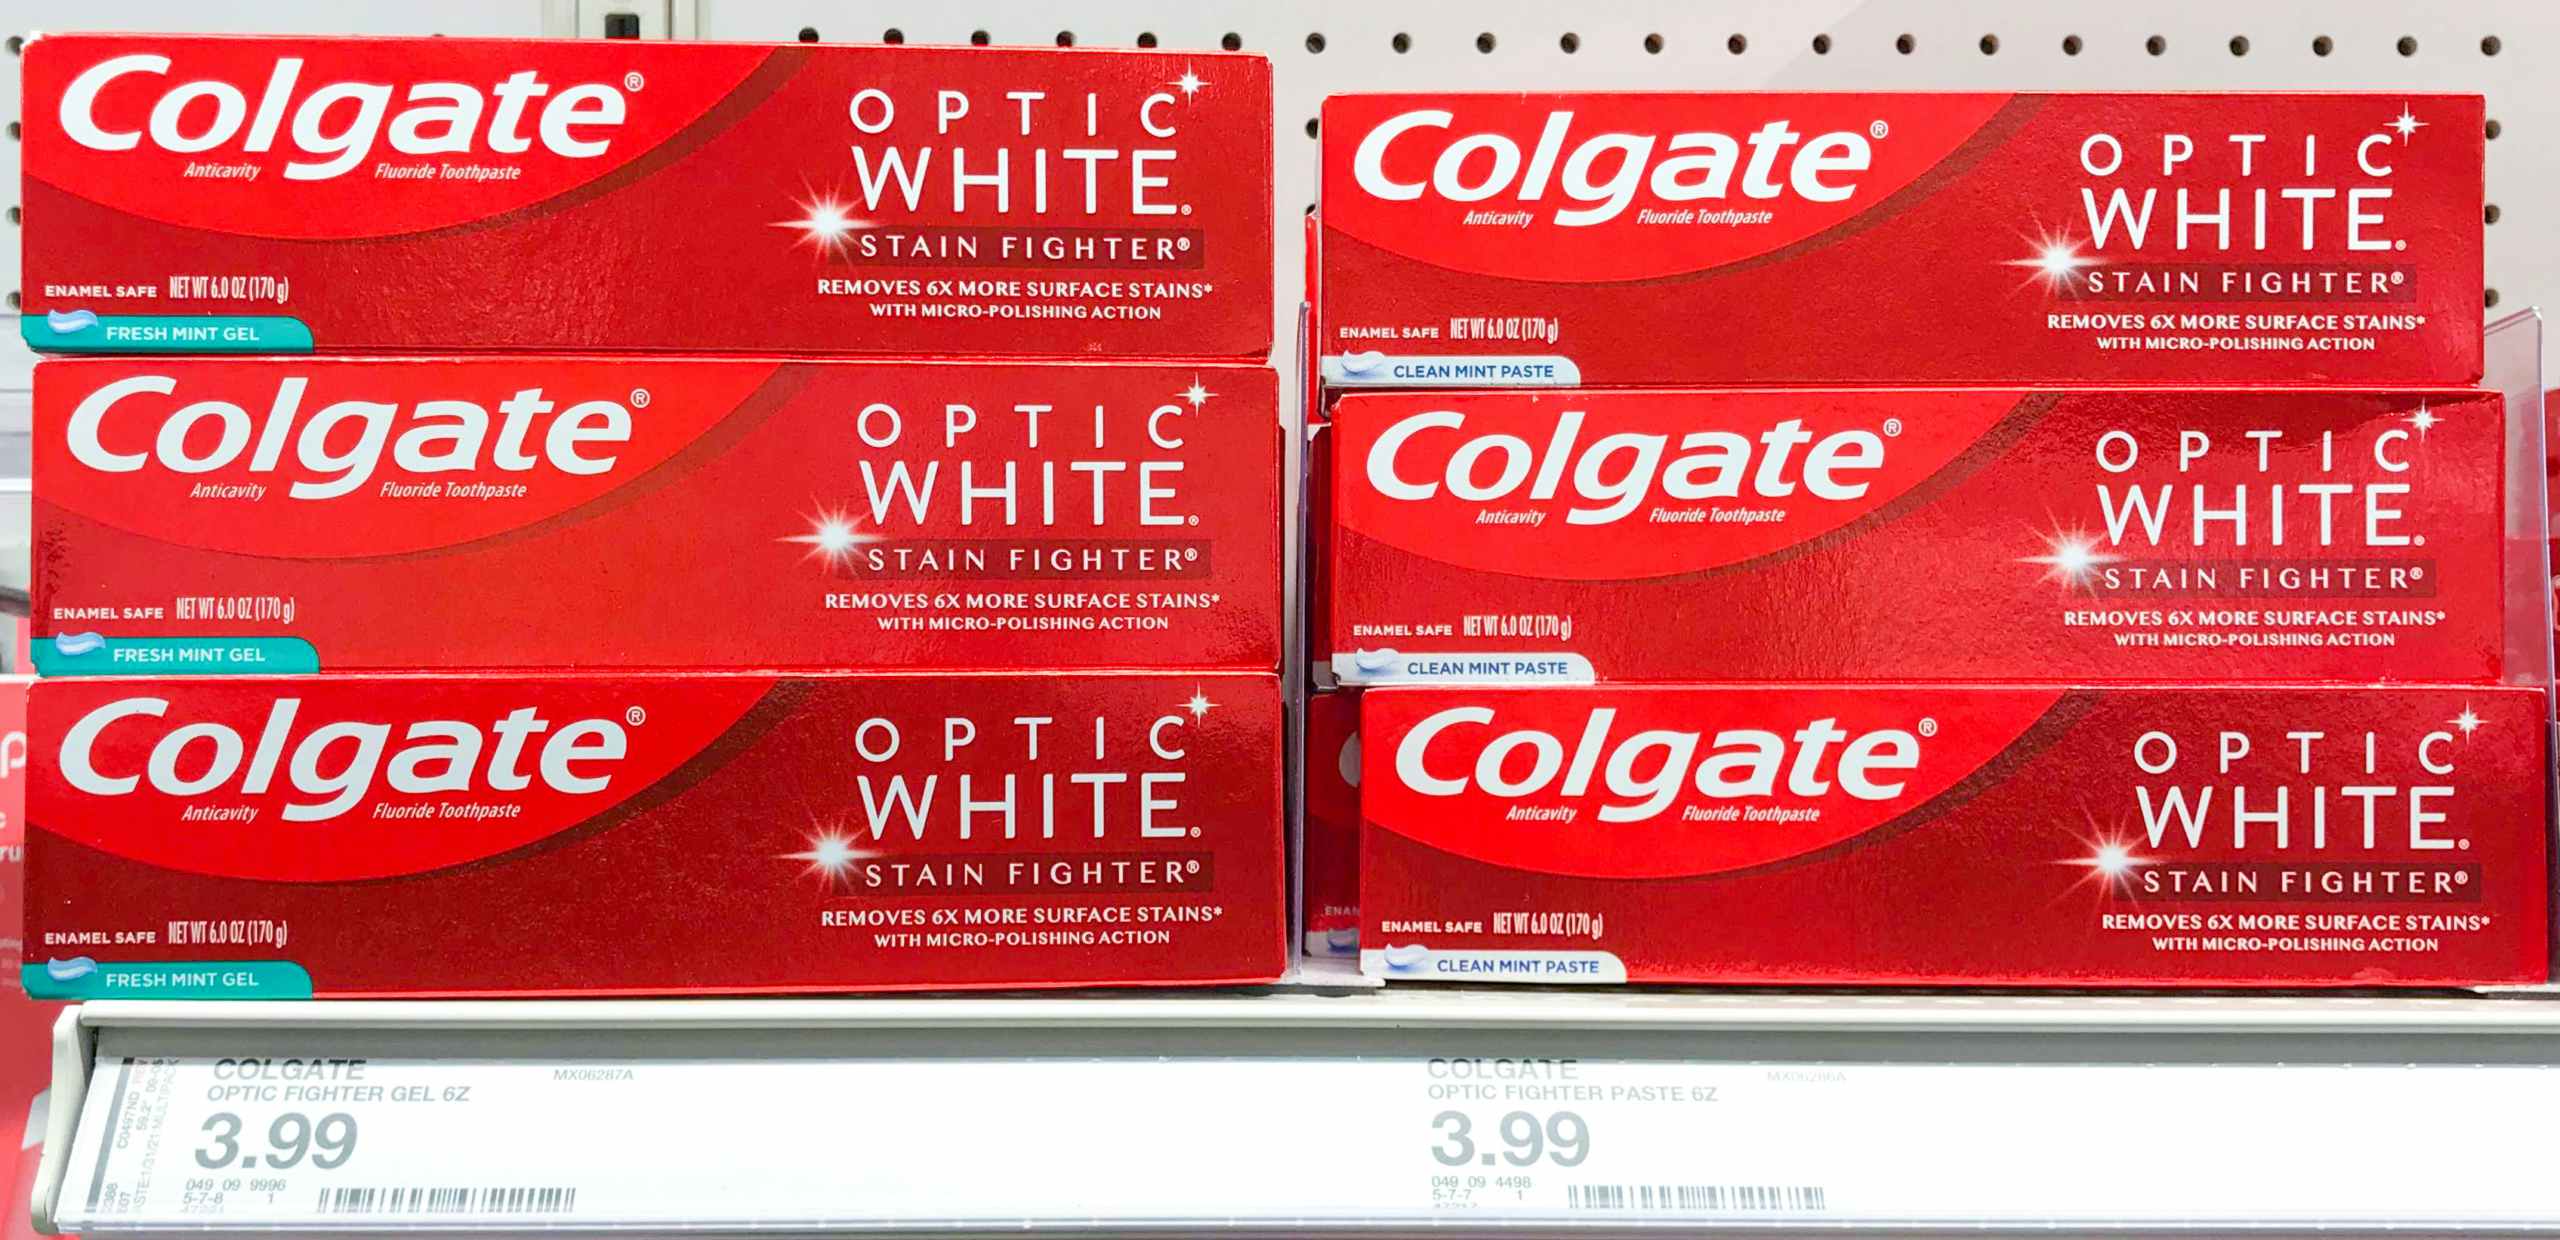 Colgate Optic White Toothpaste at Target